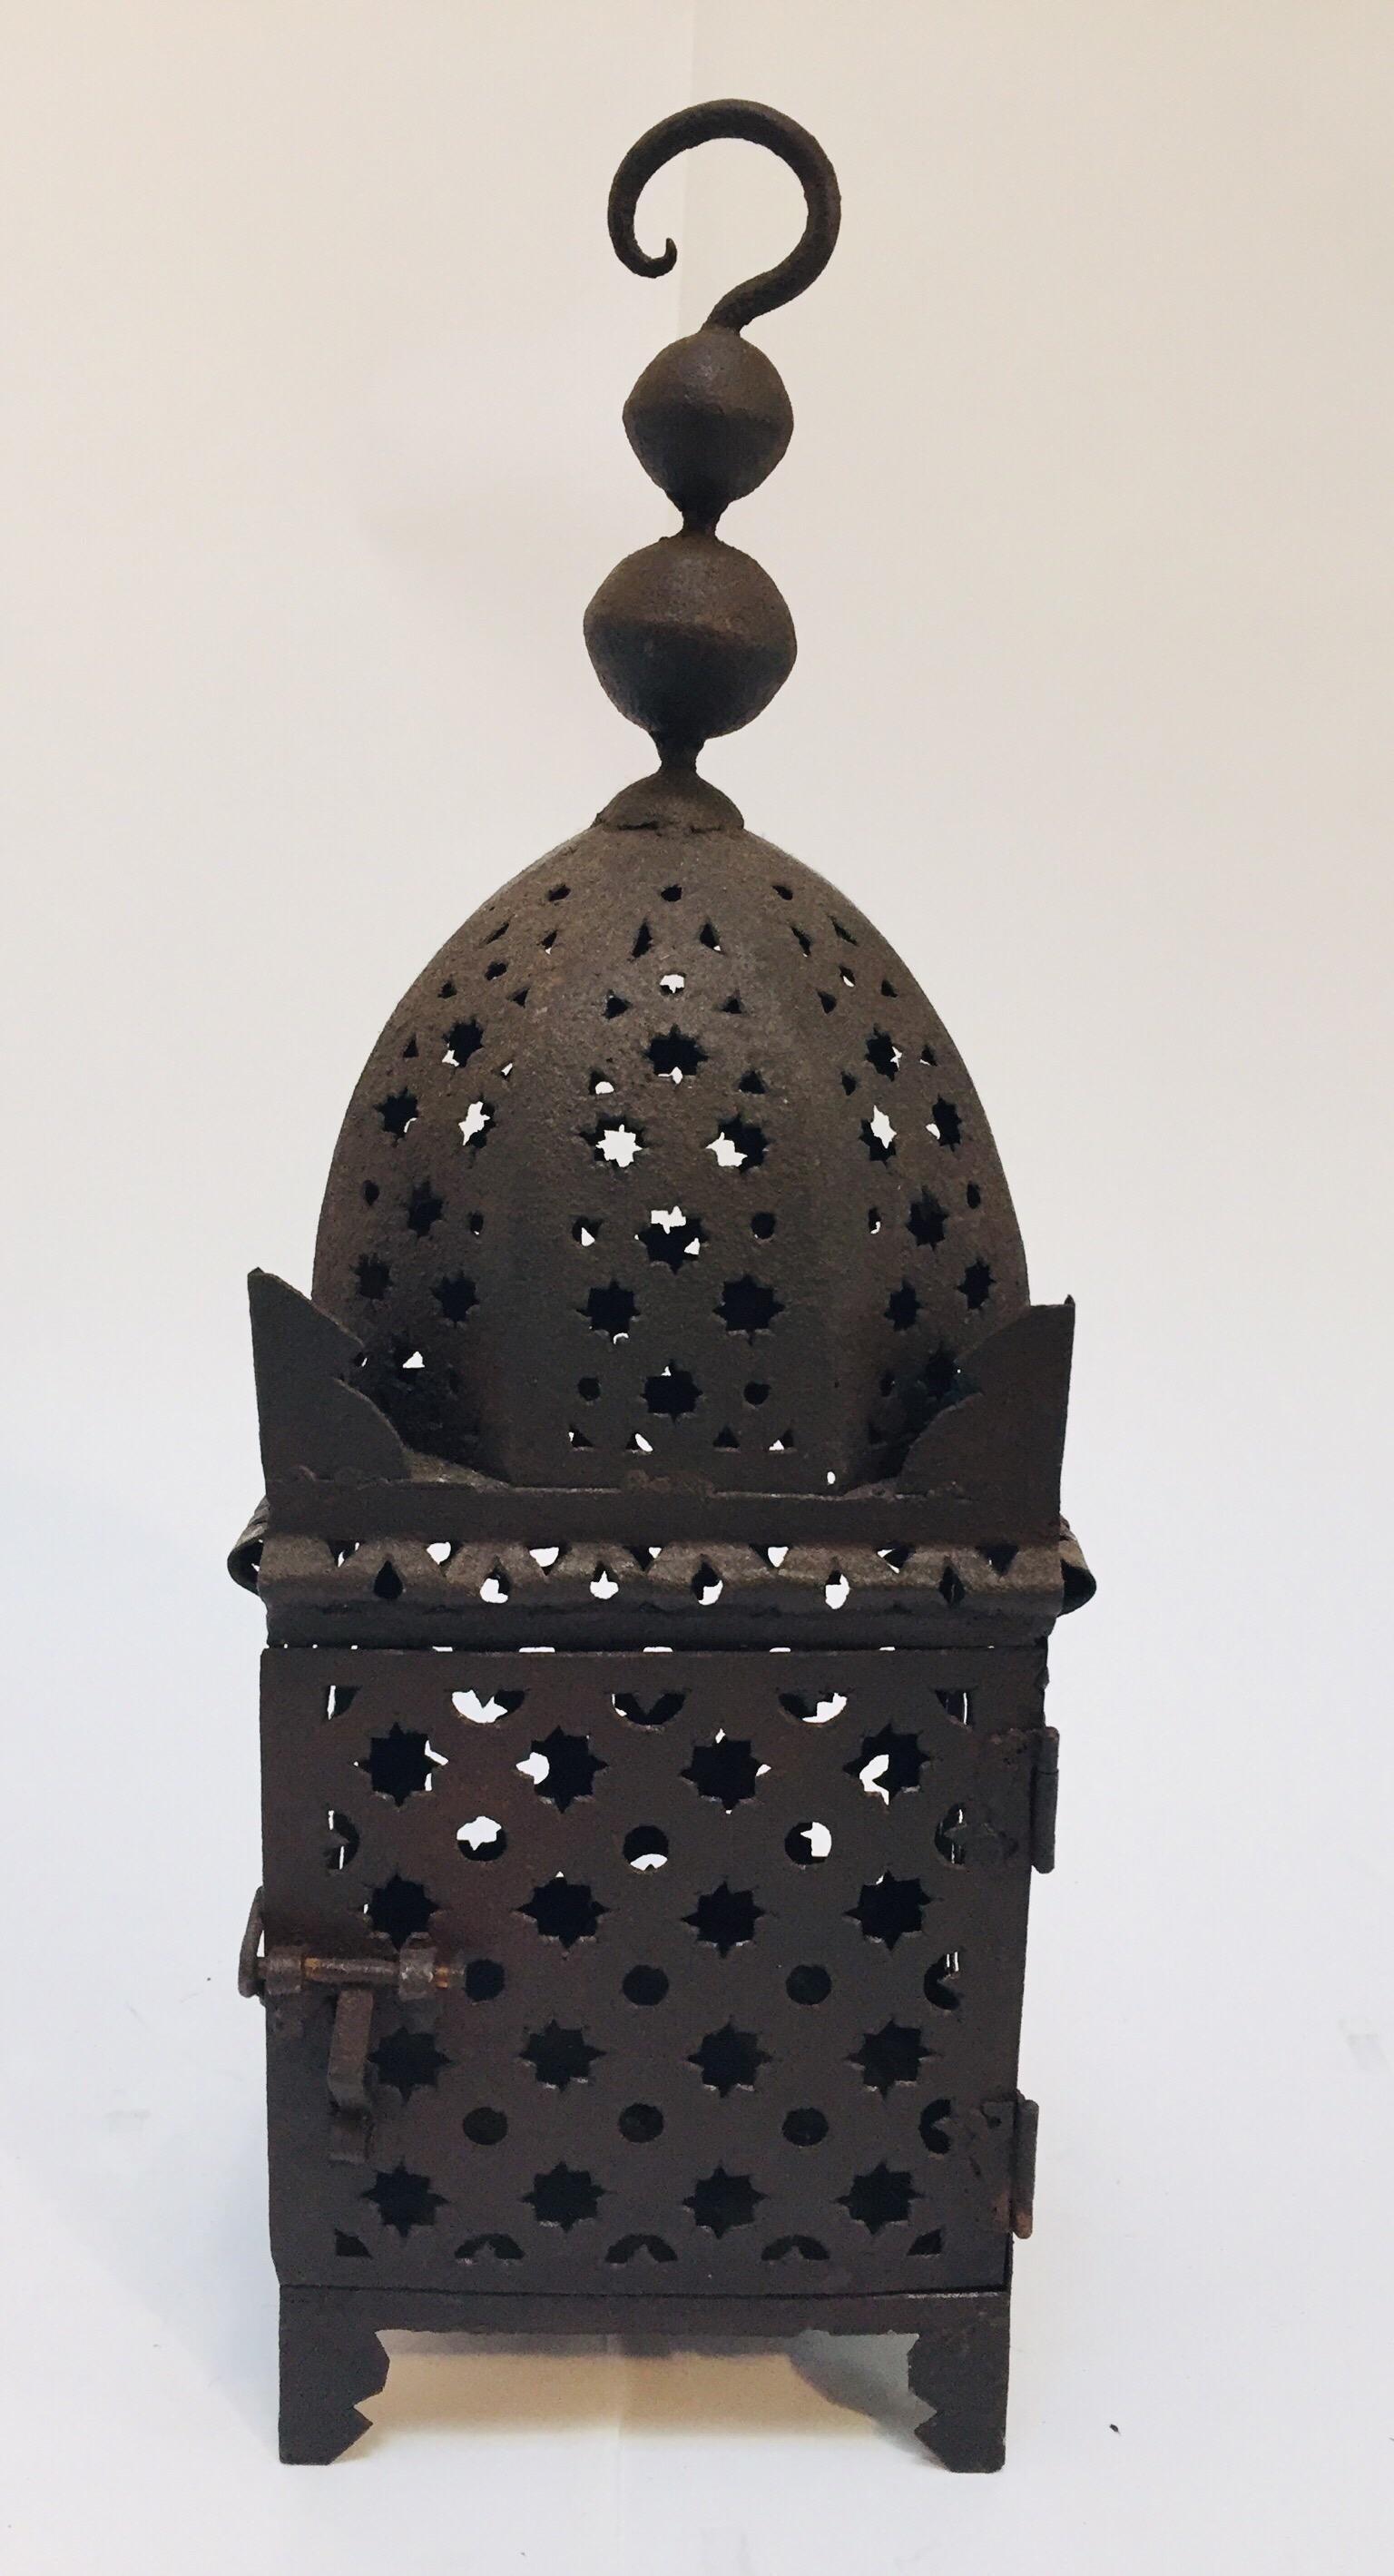 Moroccan Moorish metal candle lantern. Hurricane candle lamp handcrafted in Morocco by artisans, metal openwork and hammered with Moorish design, opens in front for use with pillar candles. The candle lanterns are great to use indoor or